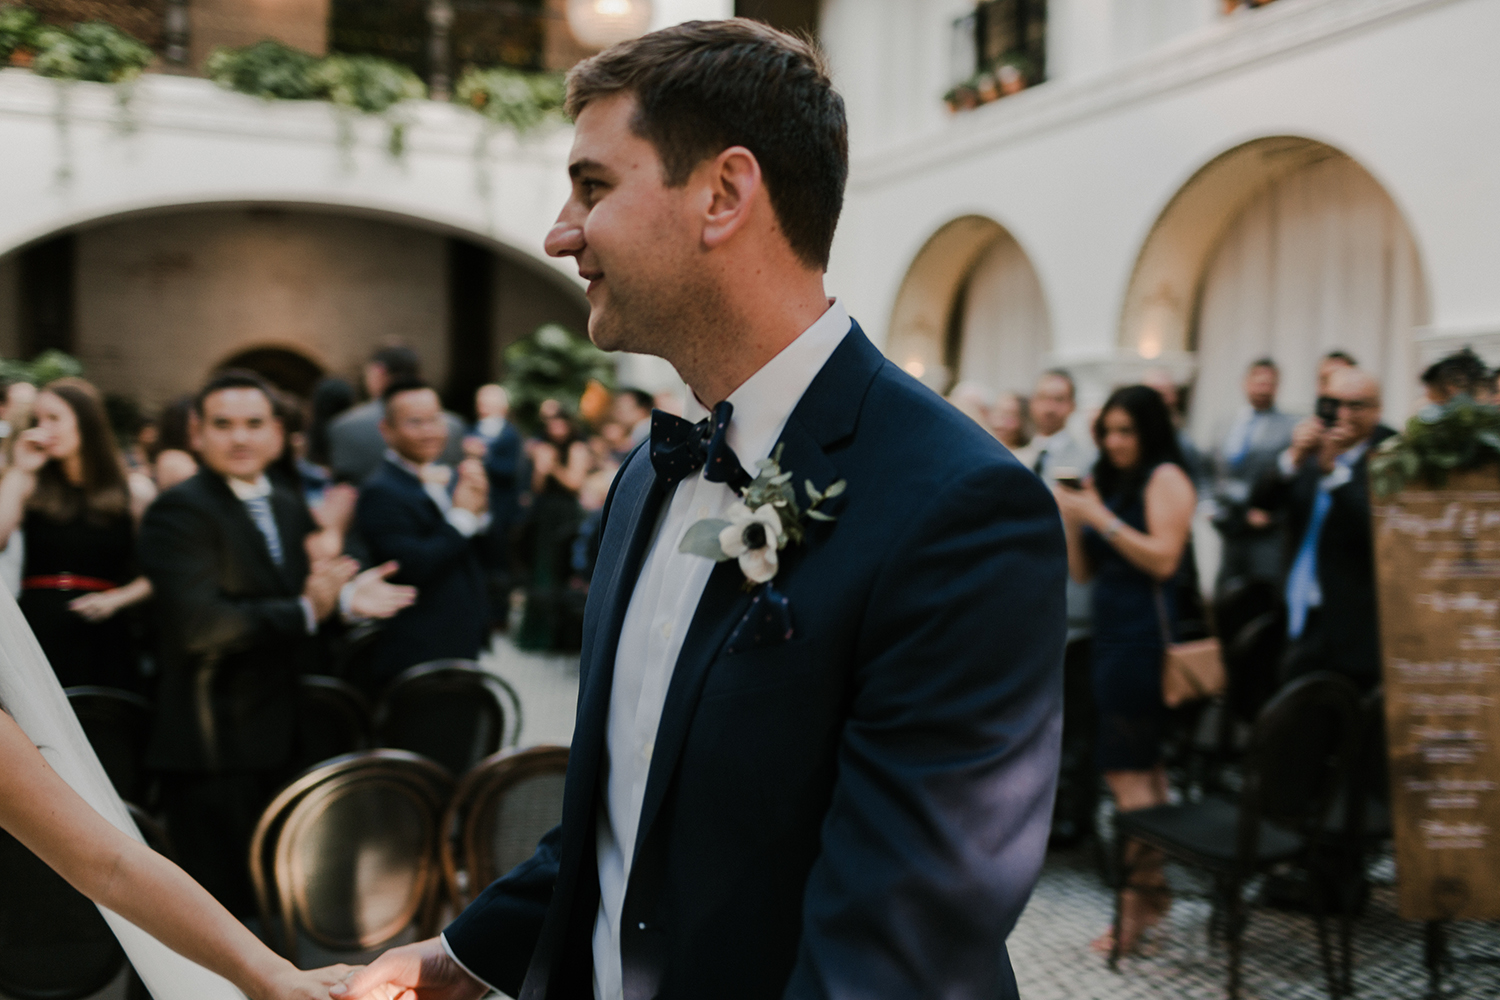 Michelle + Patrick Moody Romantic Wedding // Morgan Hydinger Photography // Lucky Day Events Co. // Ebell Long Beach